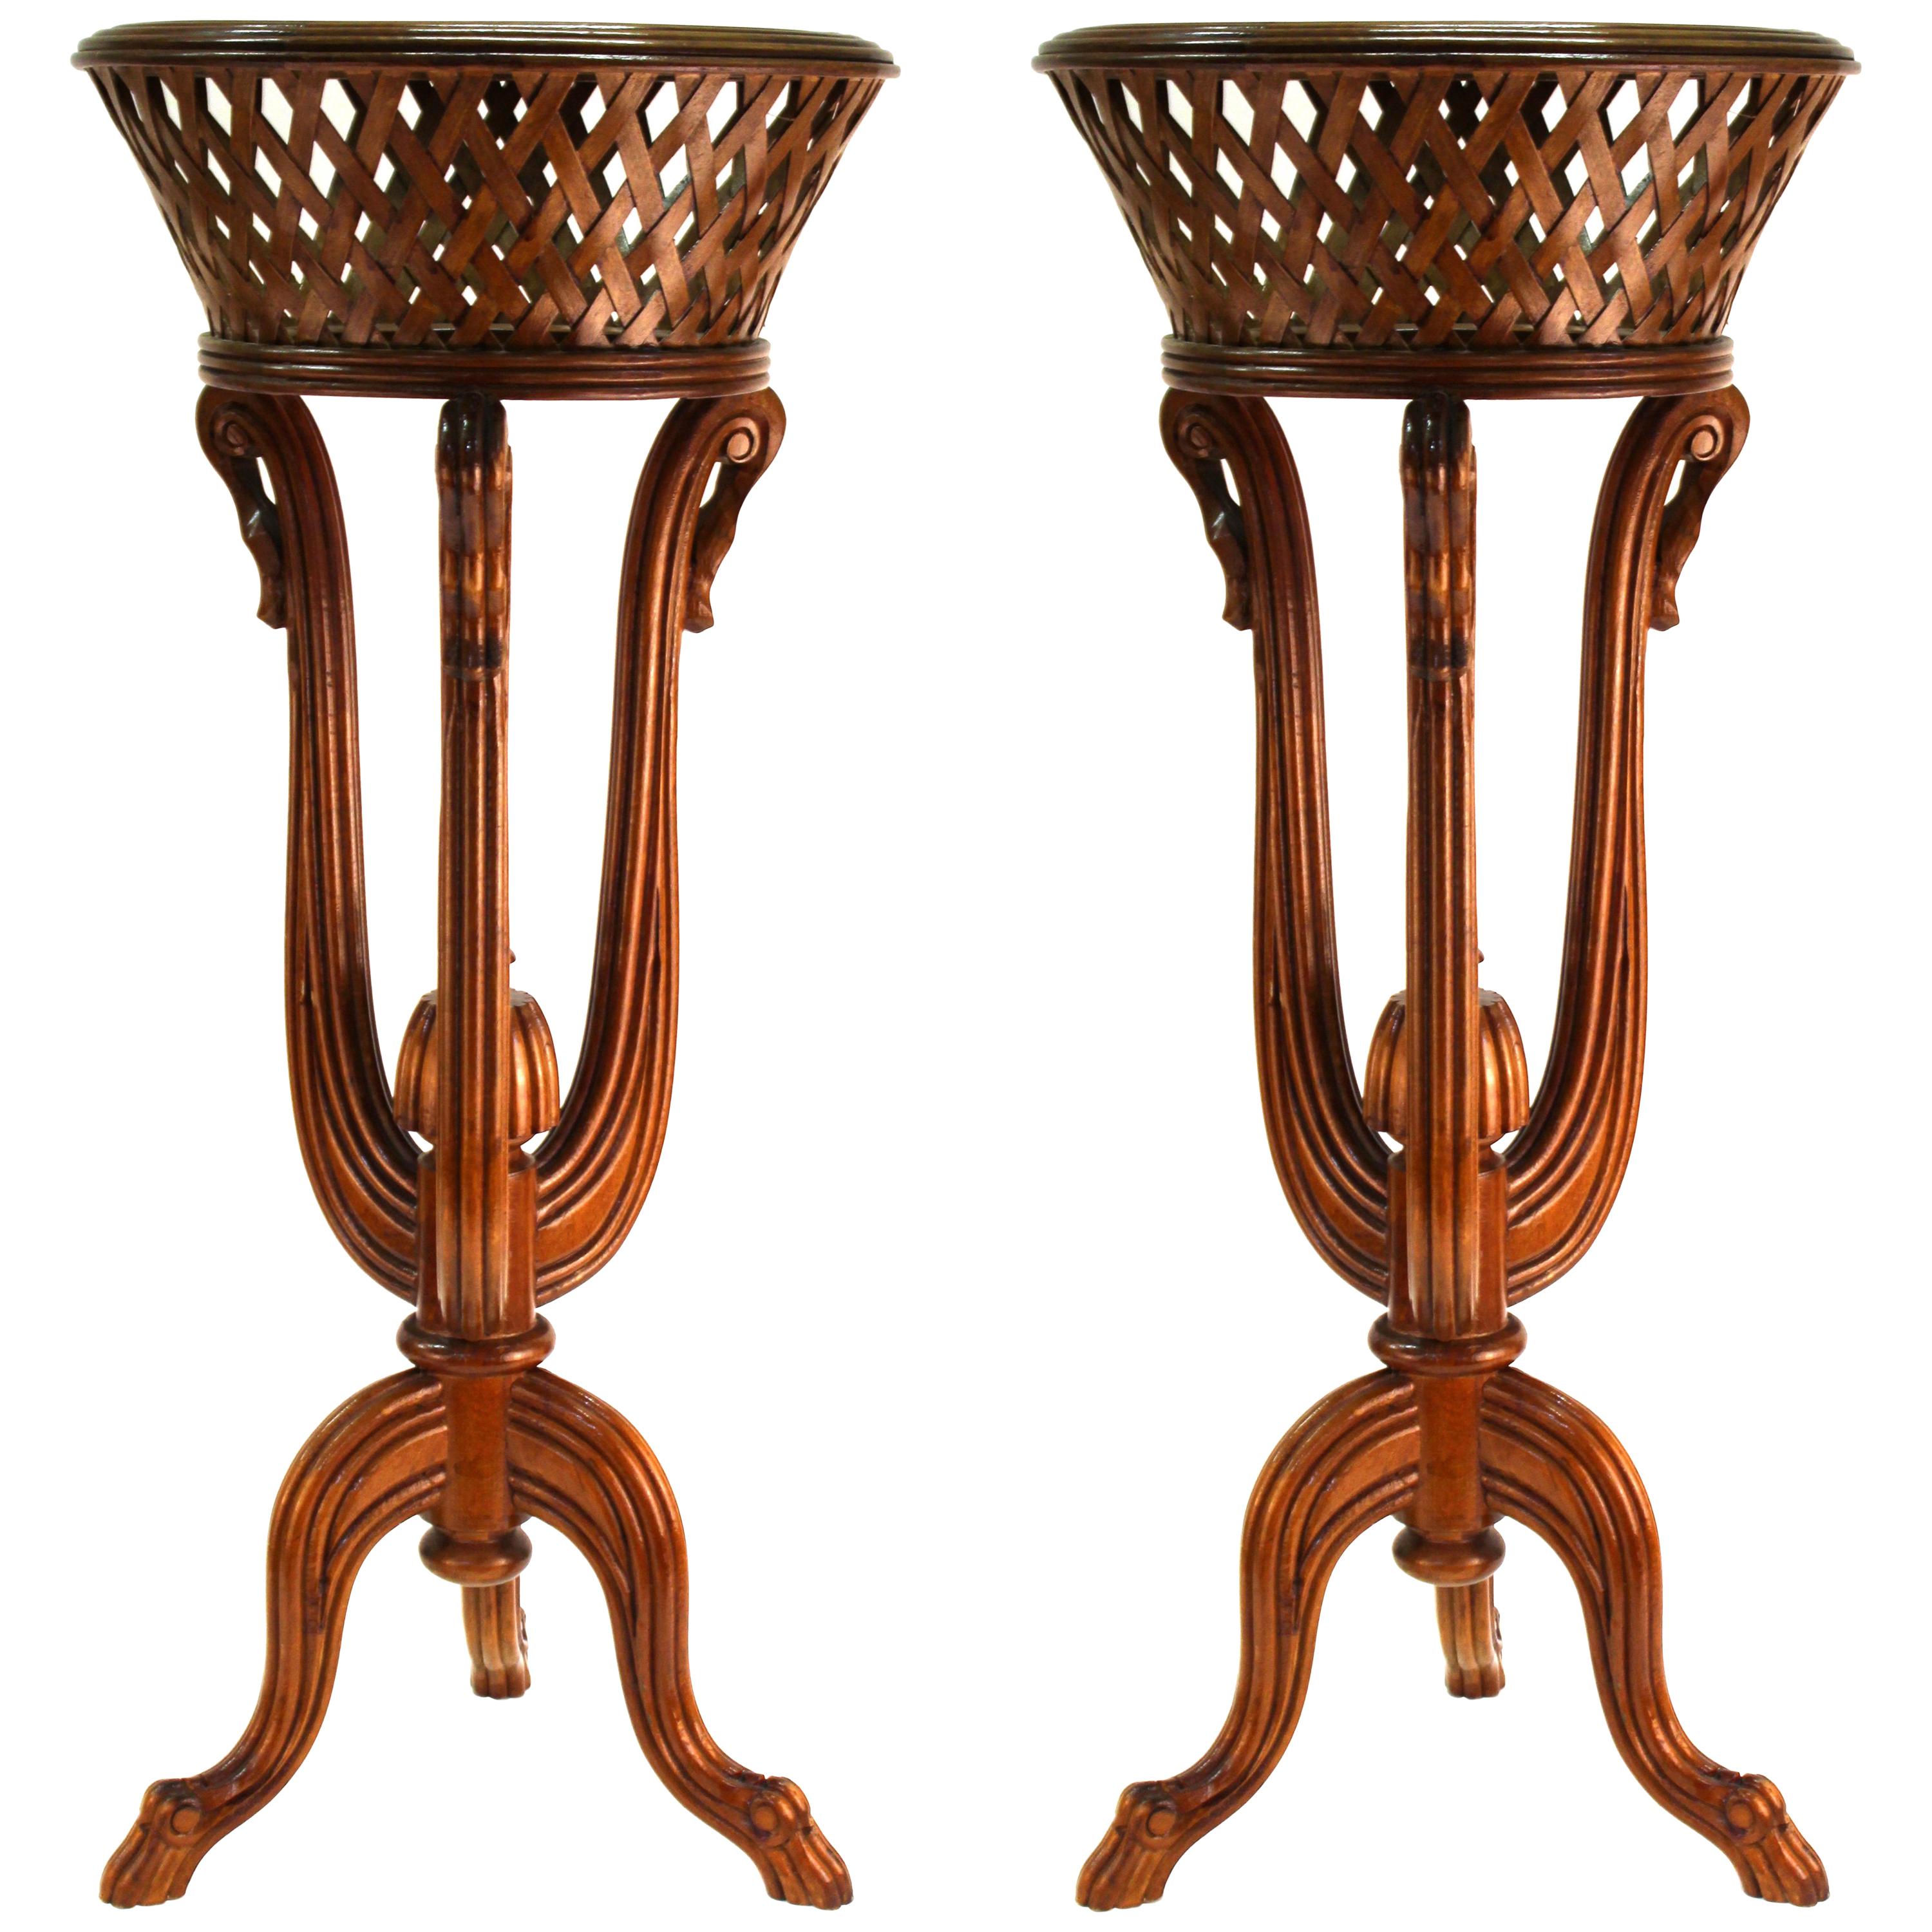 Victorian Revival Style Plant Stands in Wood